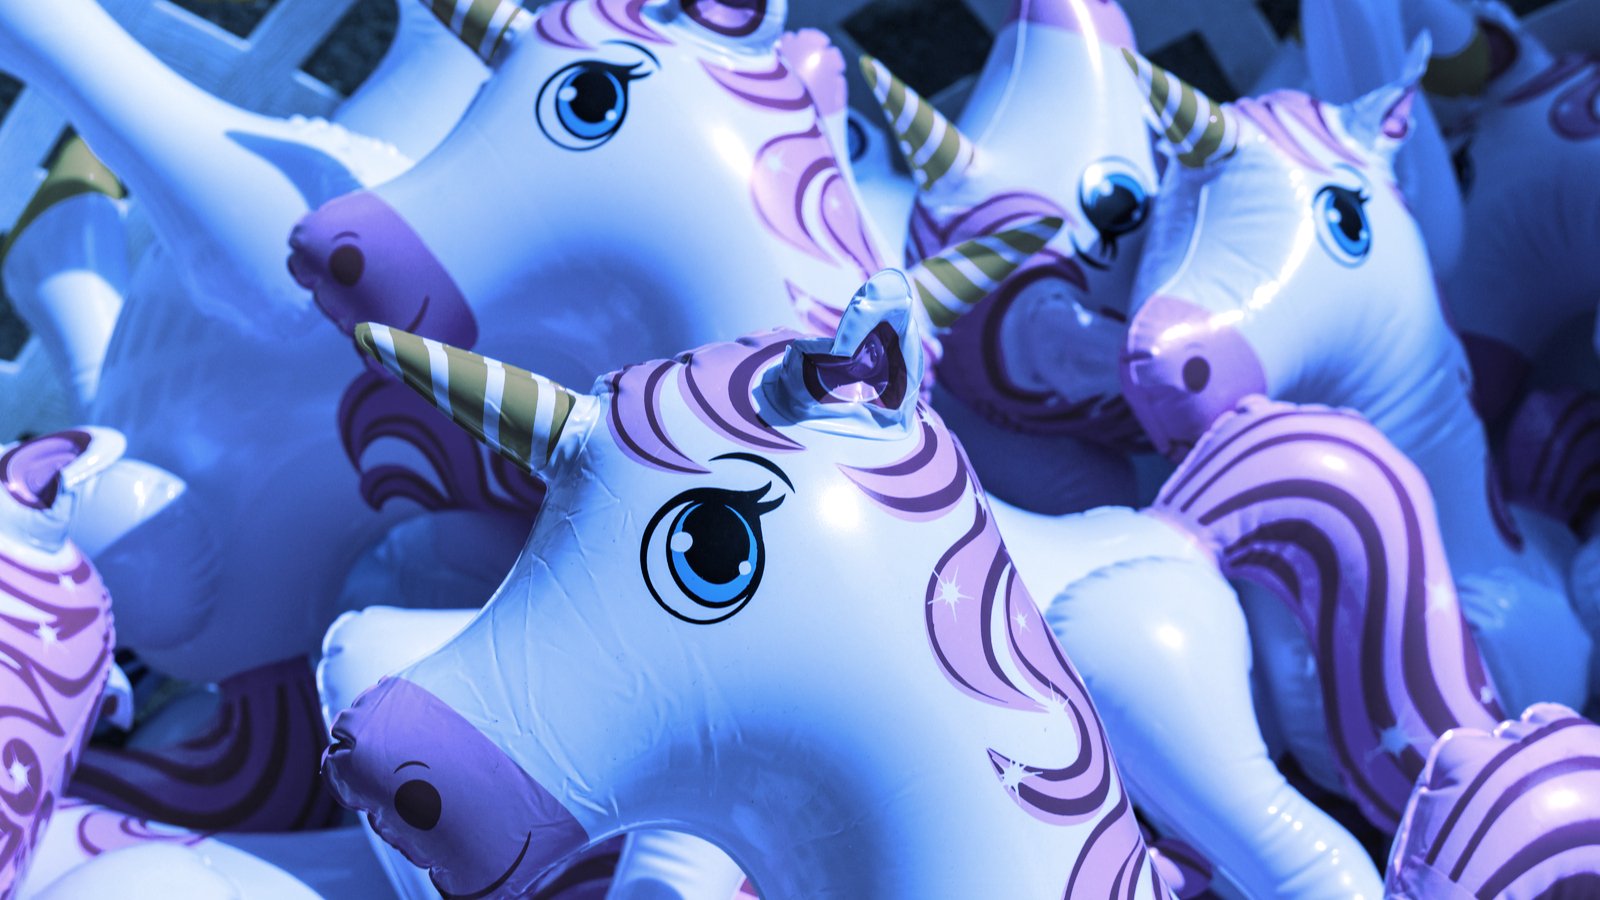 A company worth $1 billion or more is considered a unicorn. Image: Shutterstock